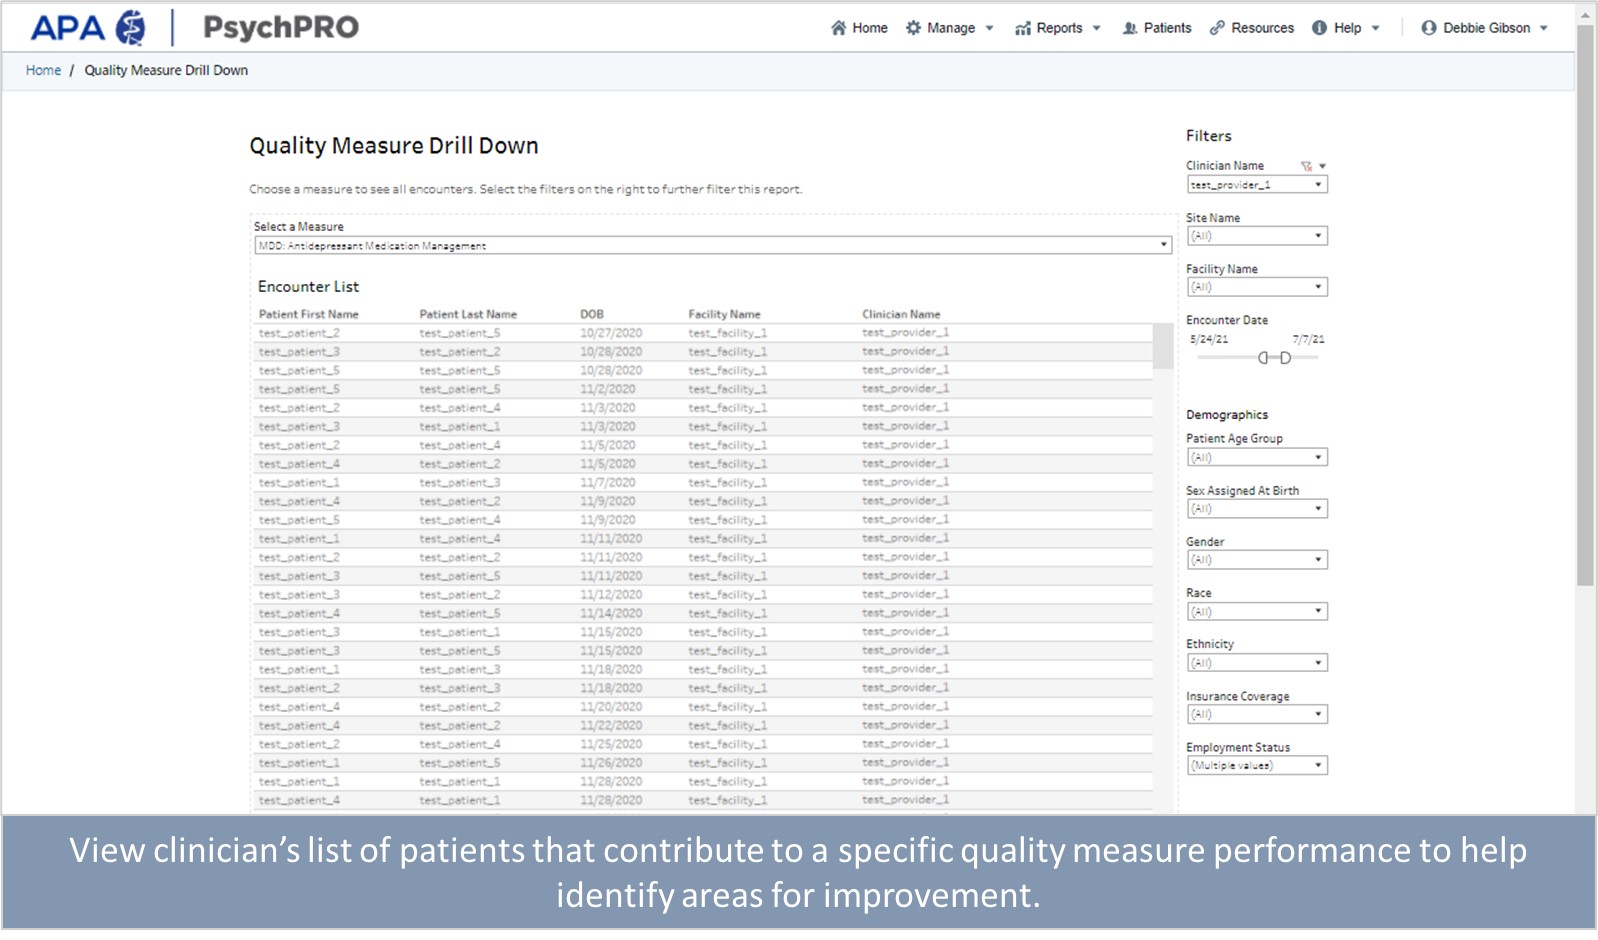 Screenshot of the view of the Dashboard in the PsychPRO Portal with the text View clinician's list of patients that contribute to a specific quality measure performance to help identify area for improvement.